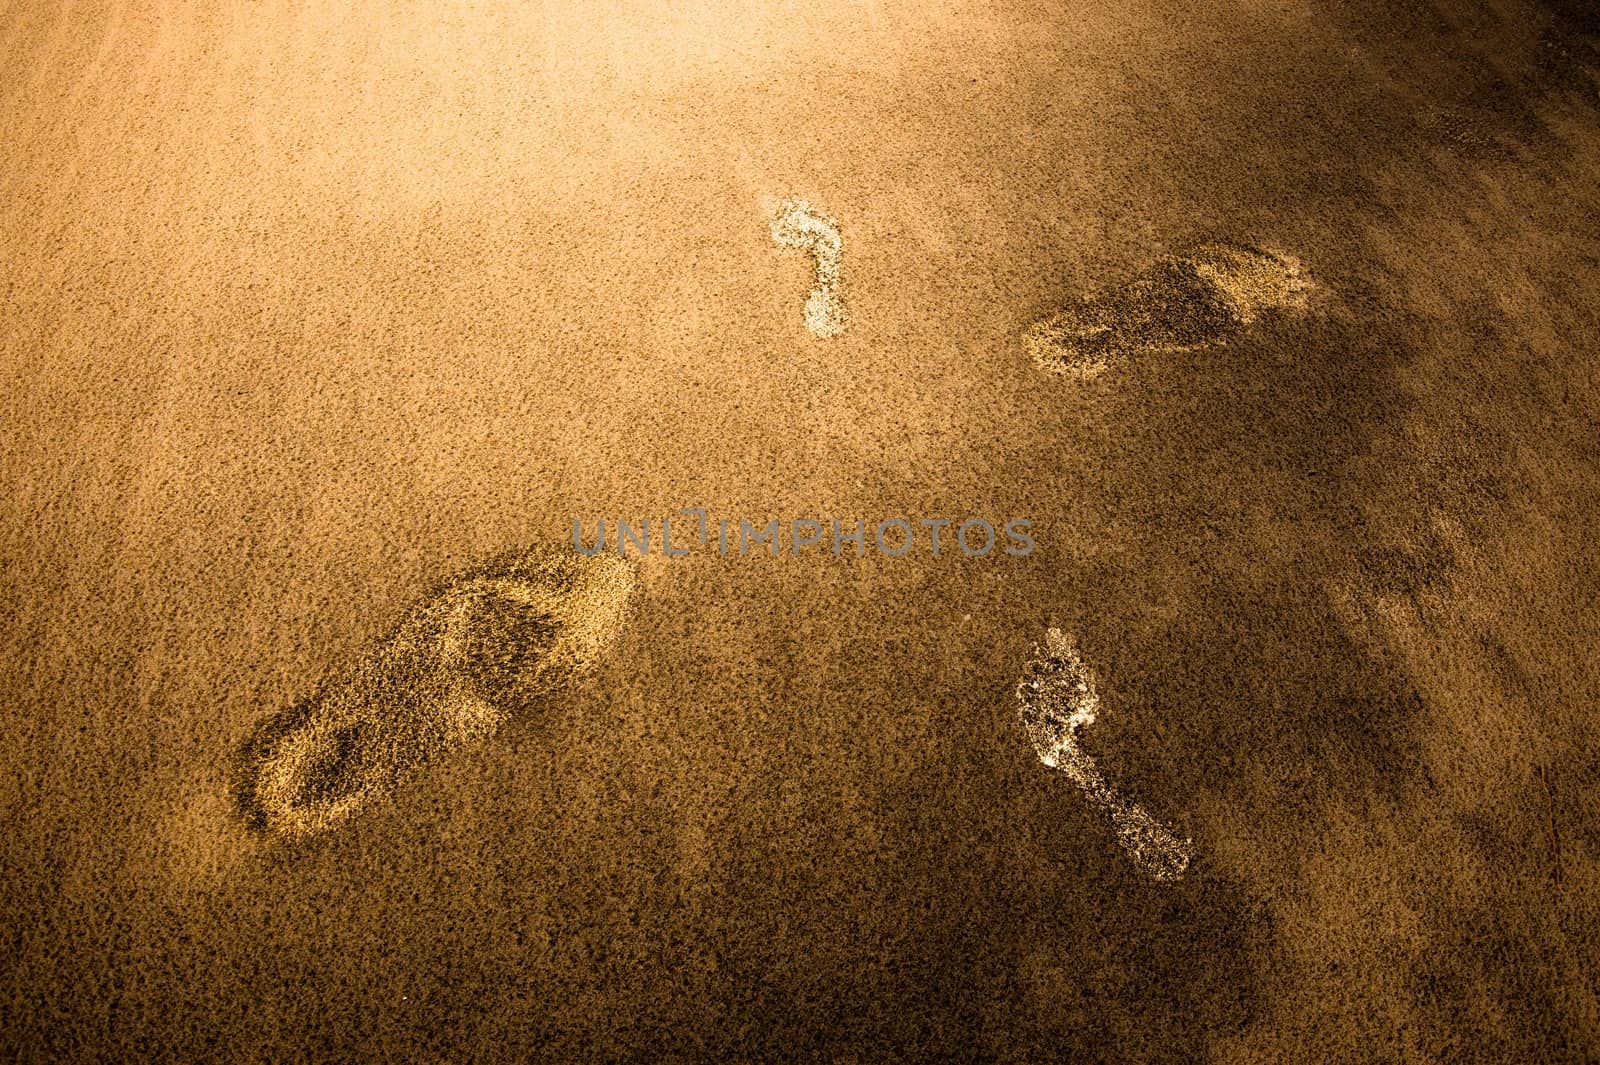 Large and small traces in the sand crossing each other